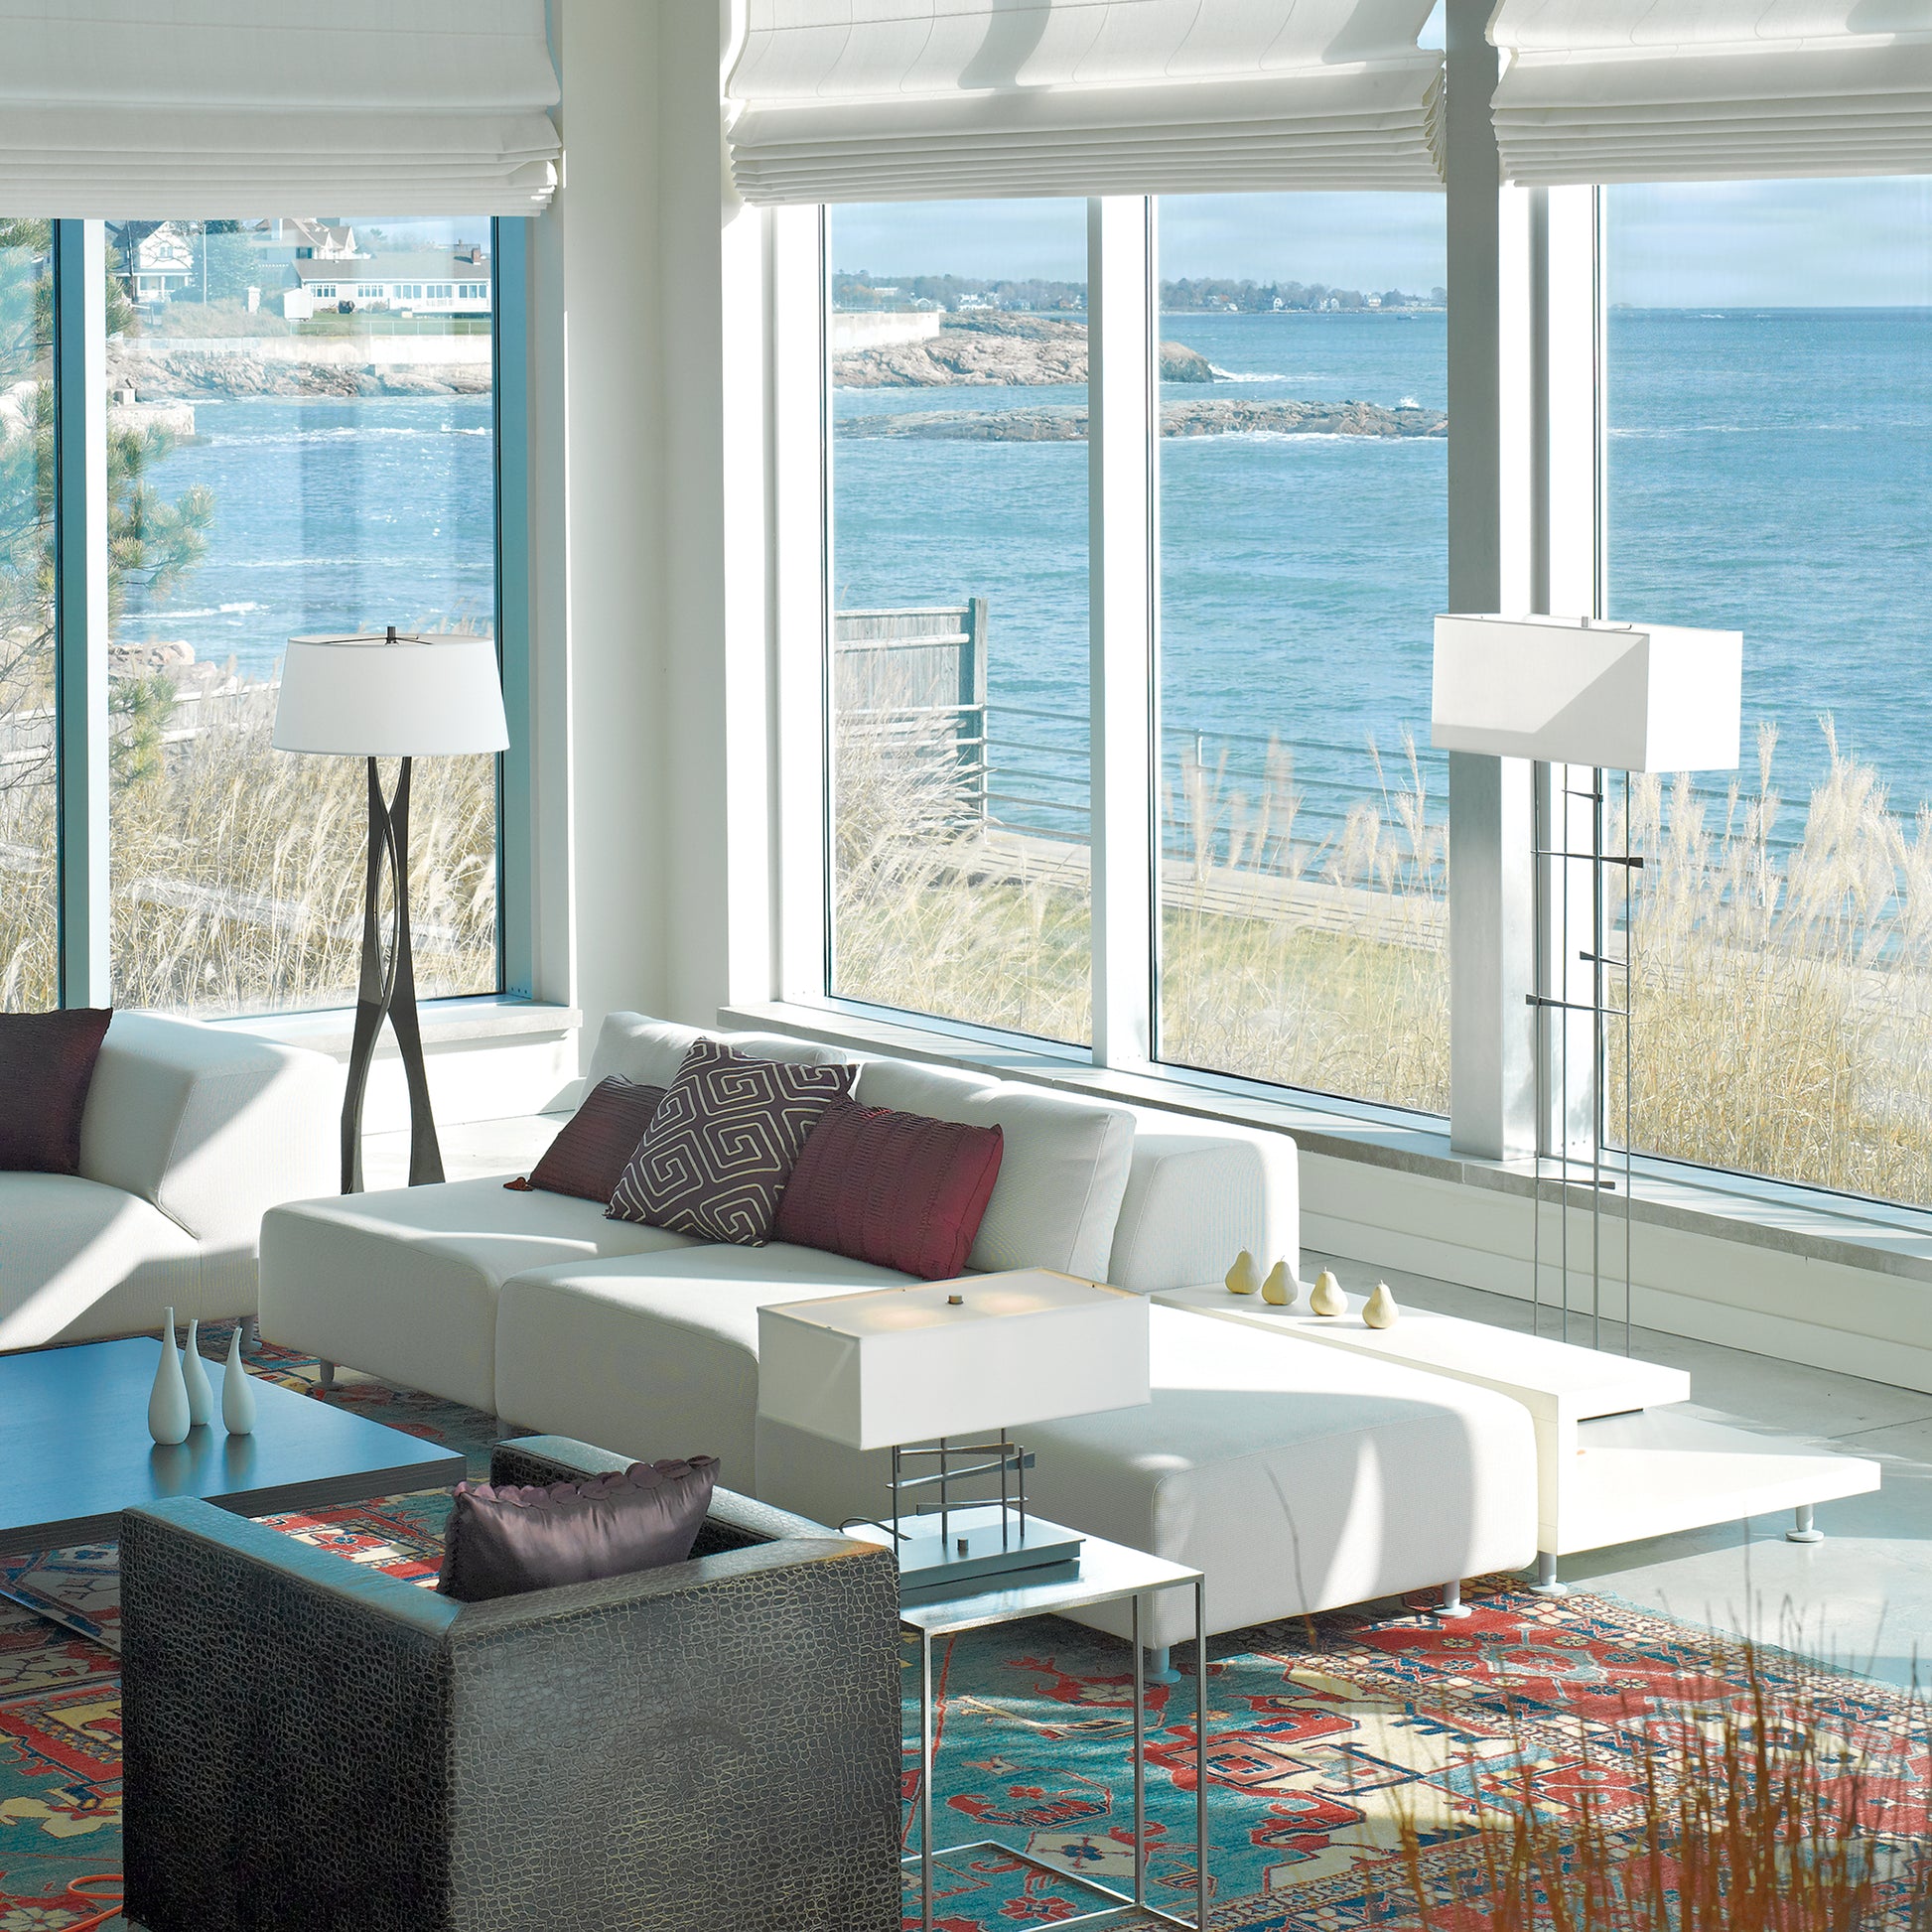 Modern, bright living room with large windows offering a view of the ocean. The room features a white sofa, stylish Hubbardton Forge Moreau Floor Lamp, and a colorful rug on a white floor.